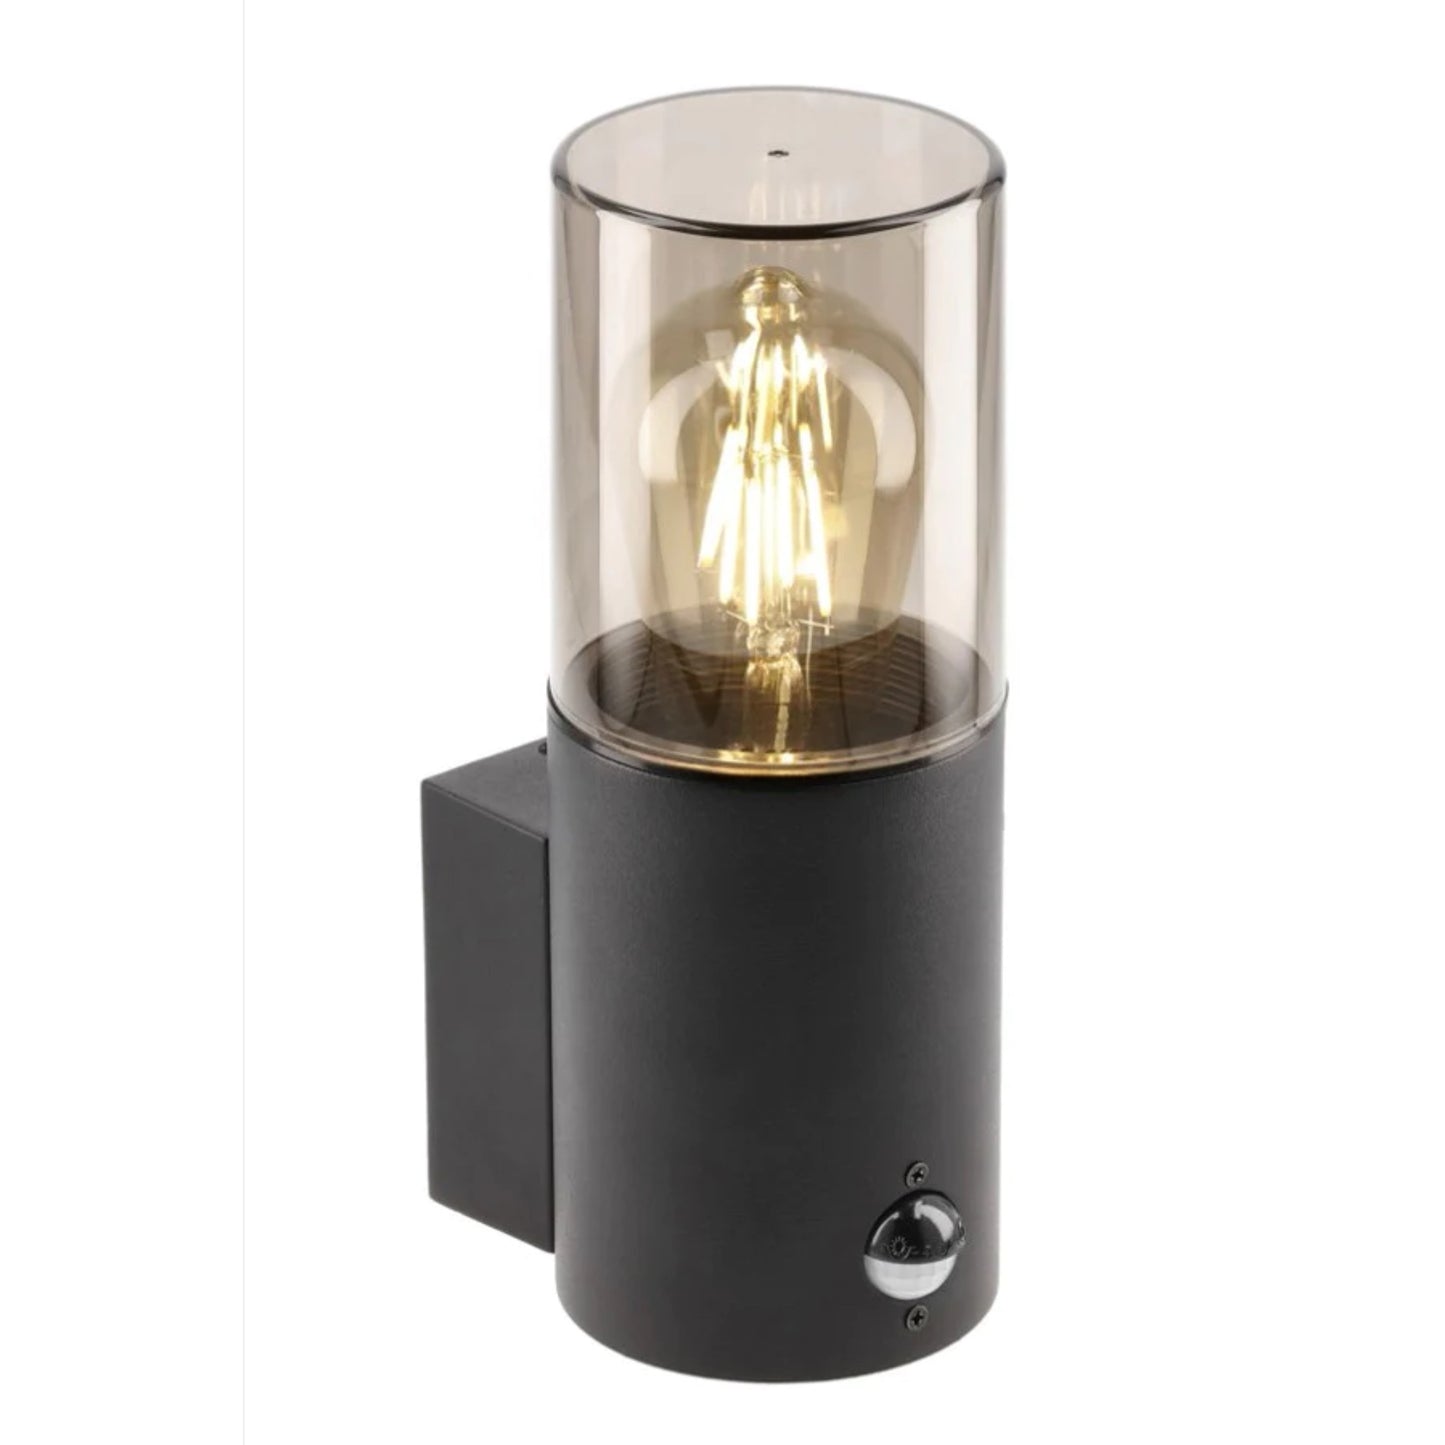 Explore our black cylinder wall light today, fit with a smoky diffuser and motion sensor features! If you require a valuable lighting system and an additional layer of security for your home’s outdoor space, then this lighting body can provide the right protection and style for you. 